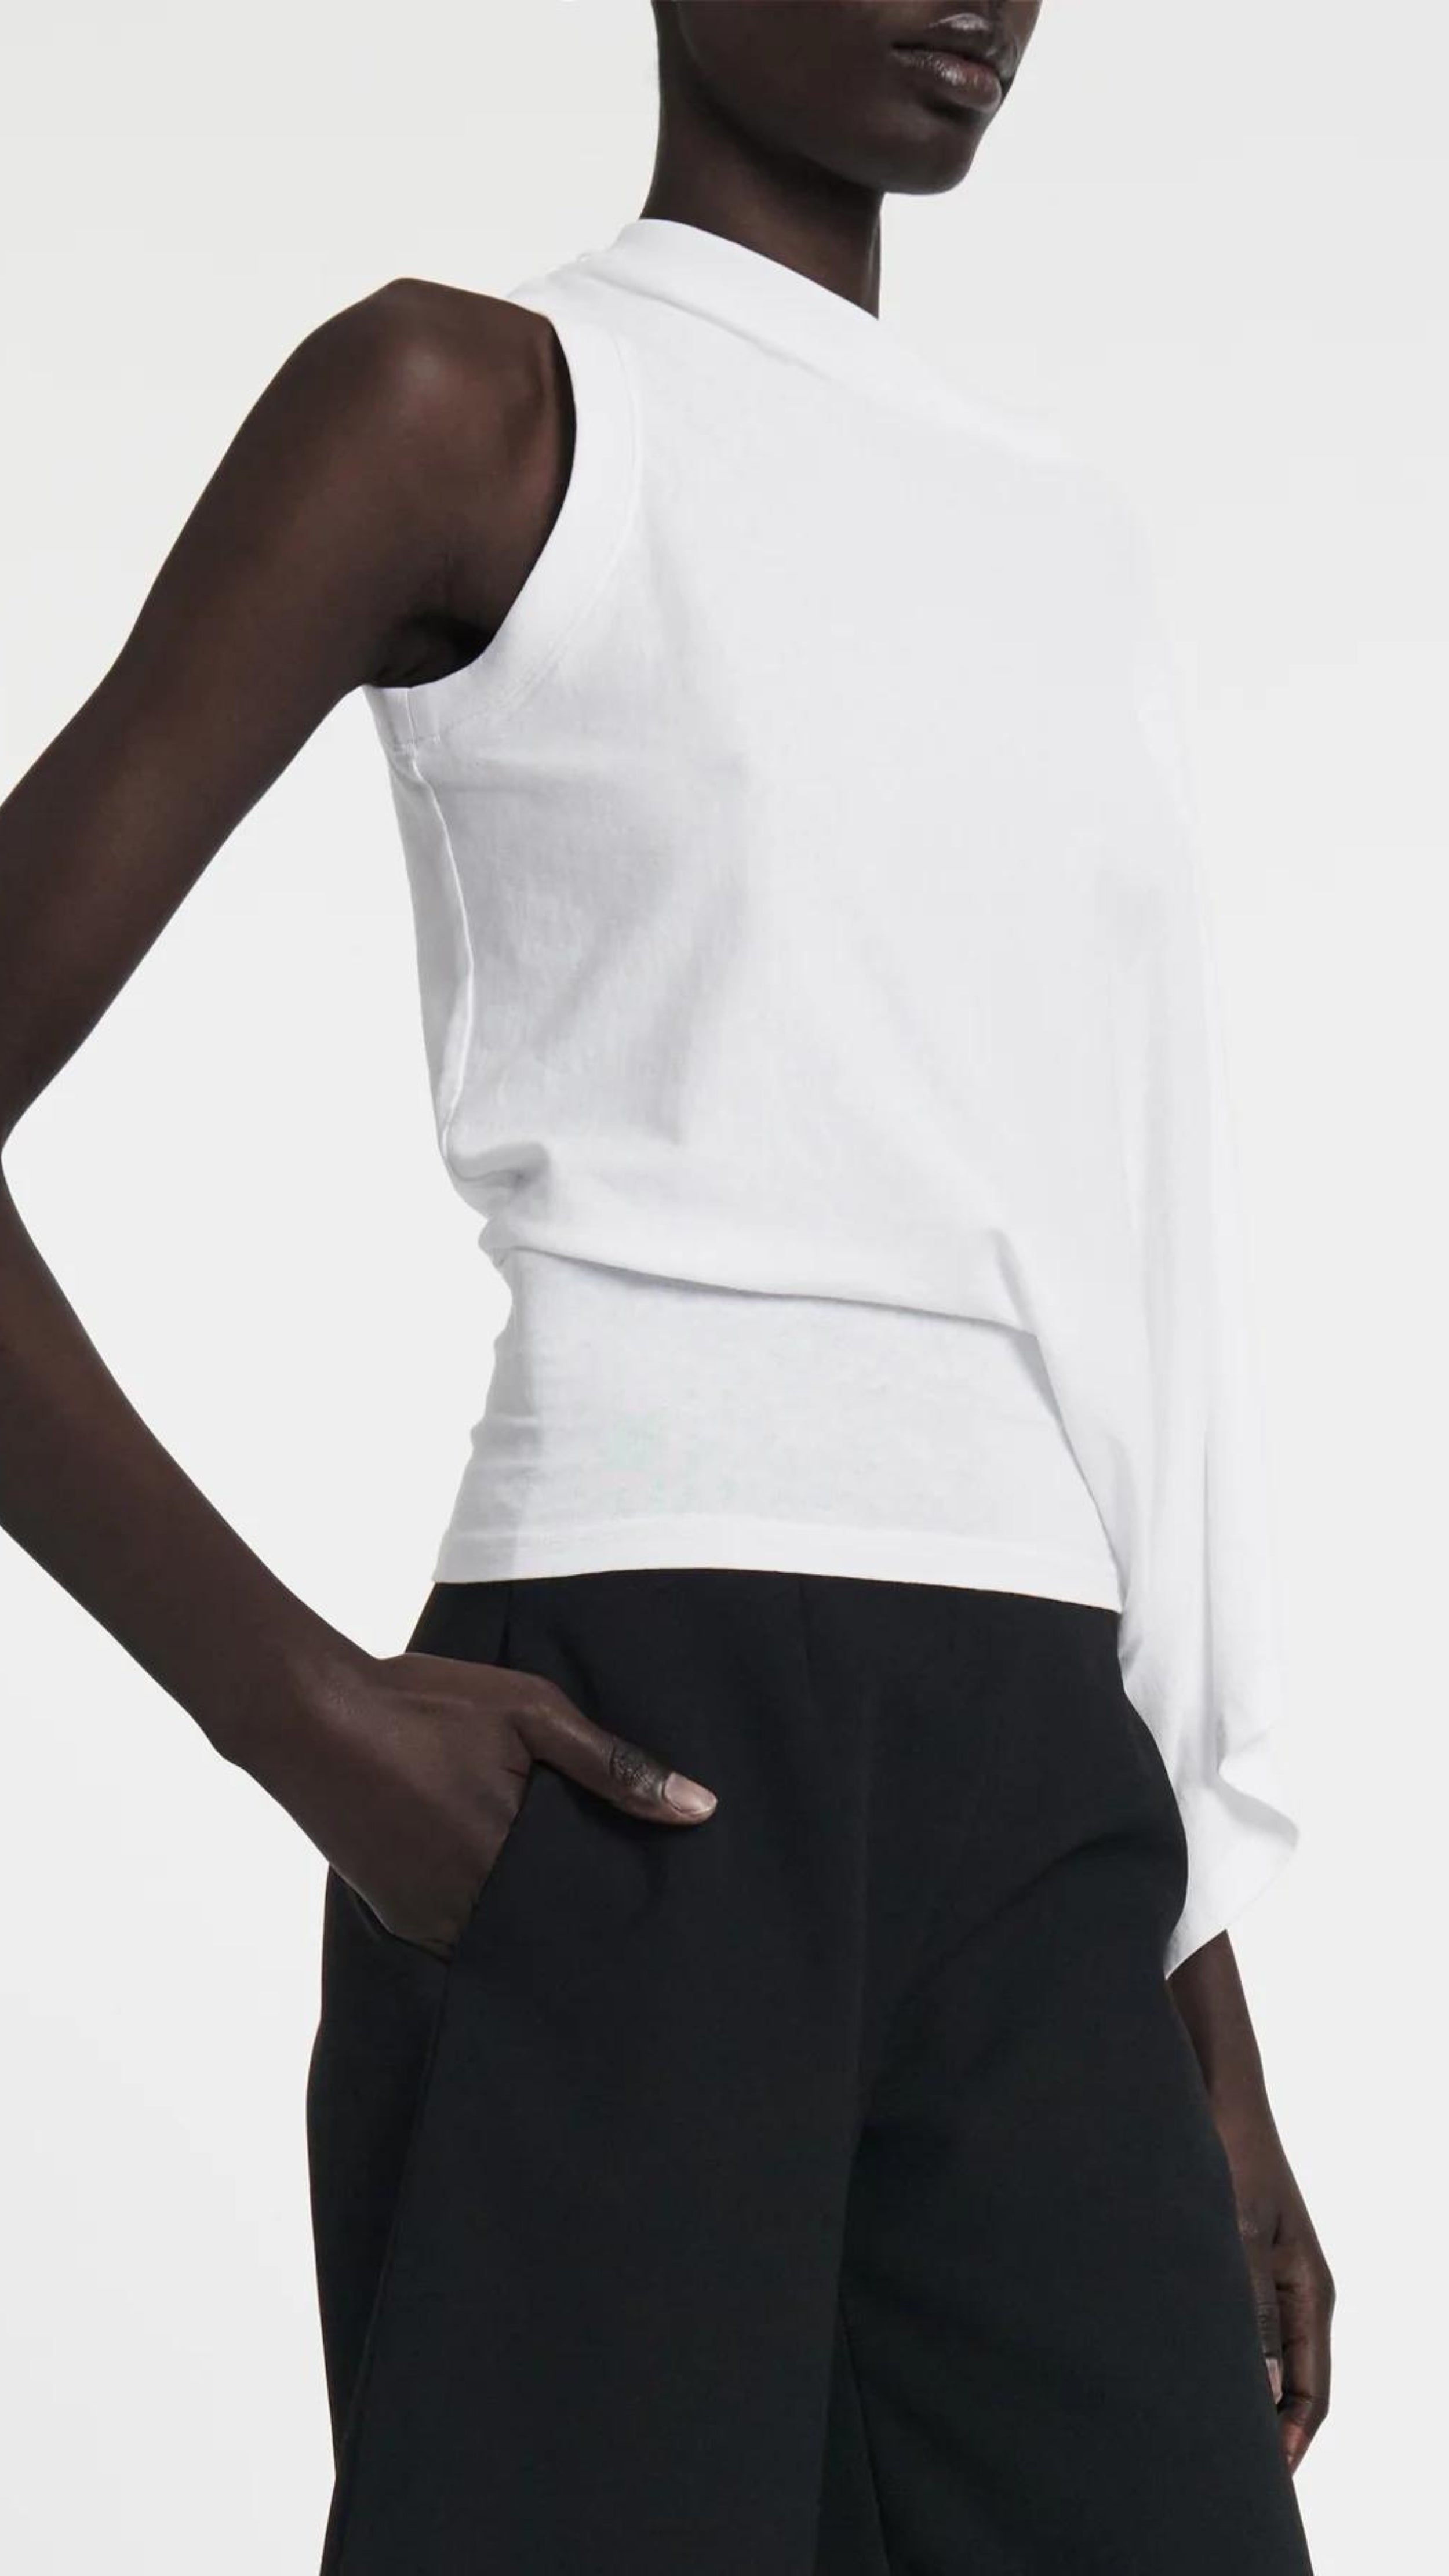 A.W.A.K.E. Mode Asymmetrical One Sleeve T-Shirt in white cotton. Sleeveless on one side and with an exaggerated sleeve on the other. Rounded t-shirt neckline that is slightly off the shoulder. The waist is fitted so the shirt drapes beautifully. Shown on model facing side